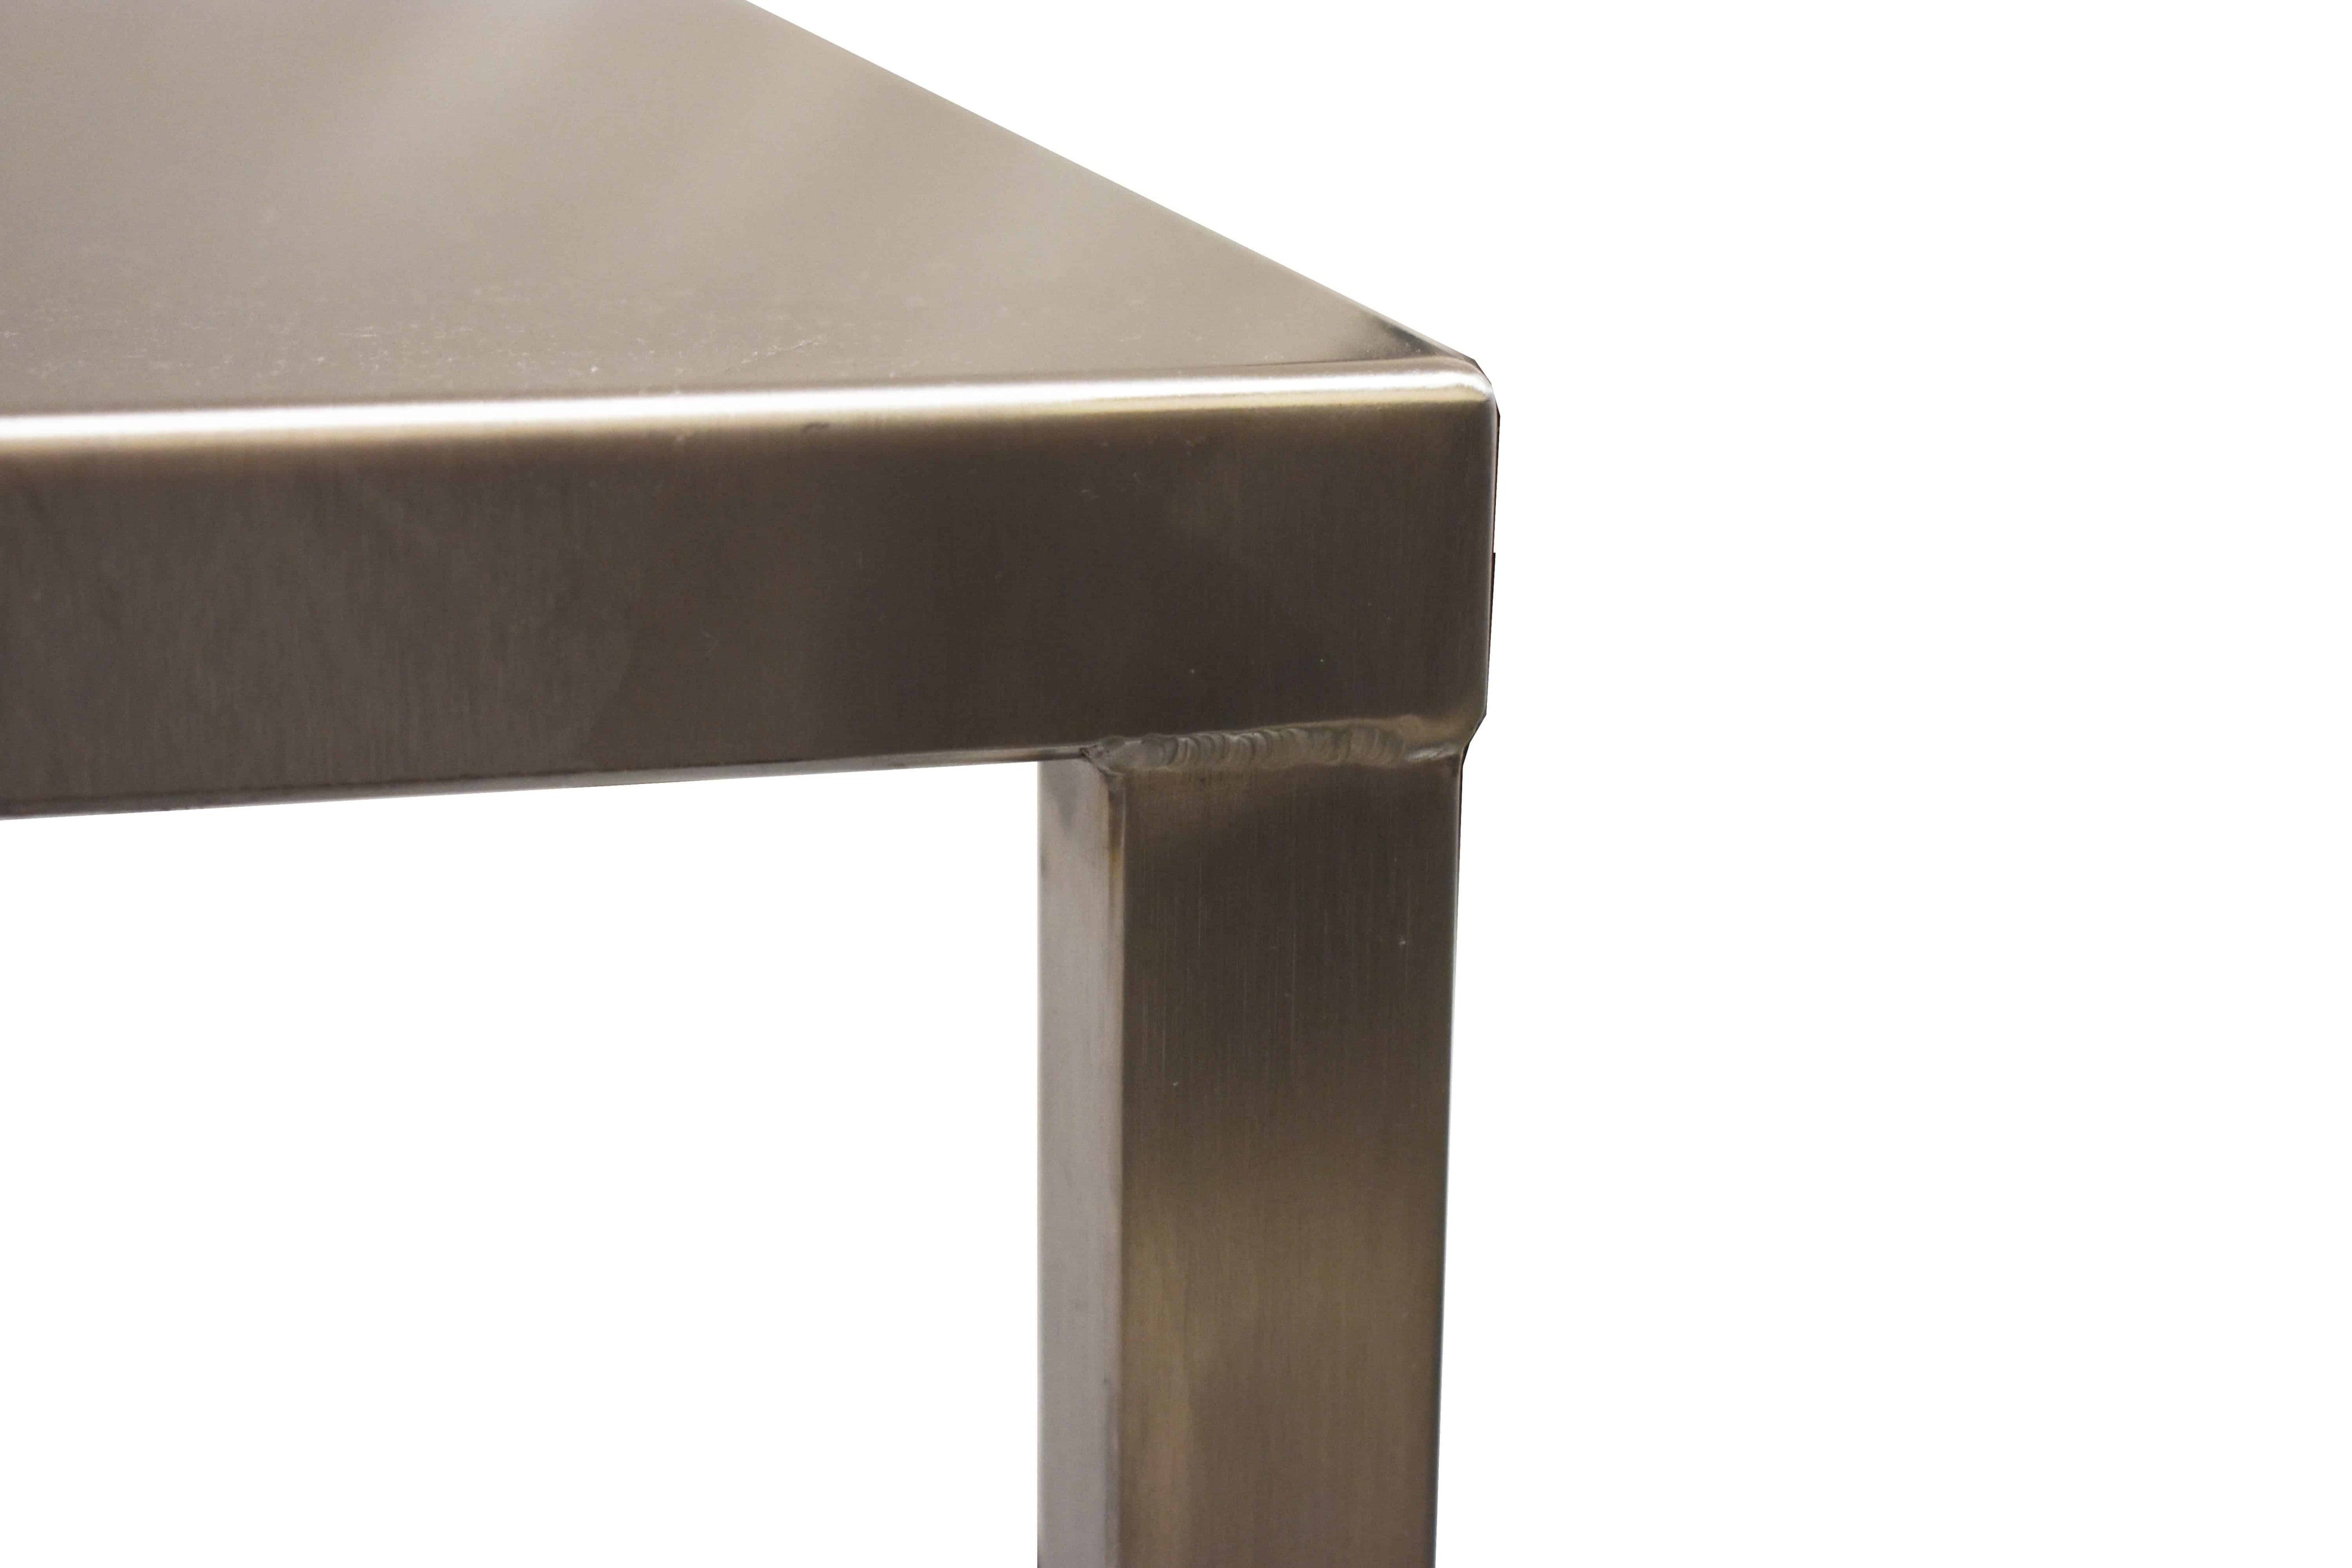 Stainless steel heavy duty table with rear tie bar